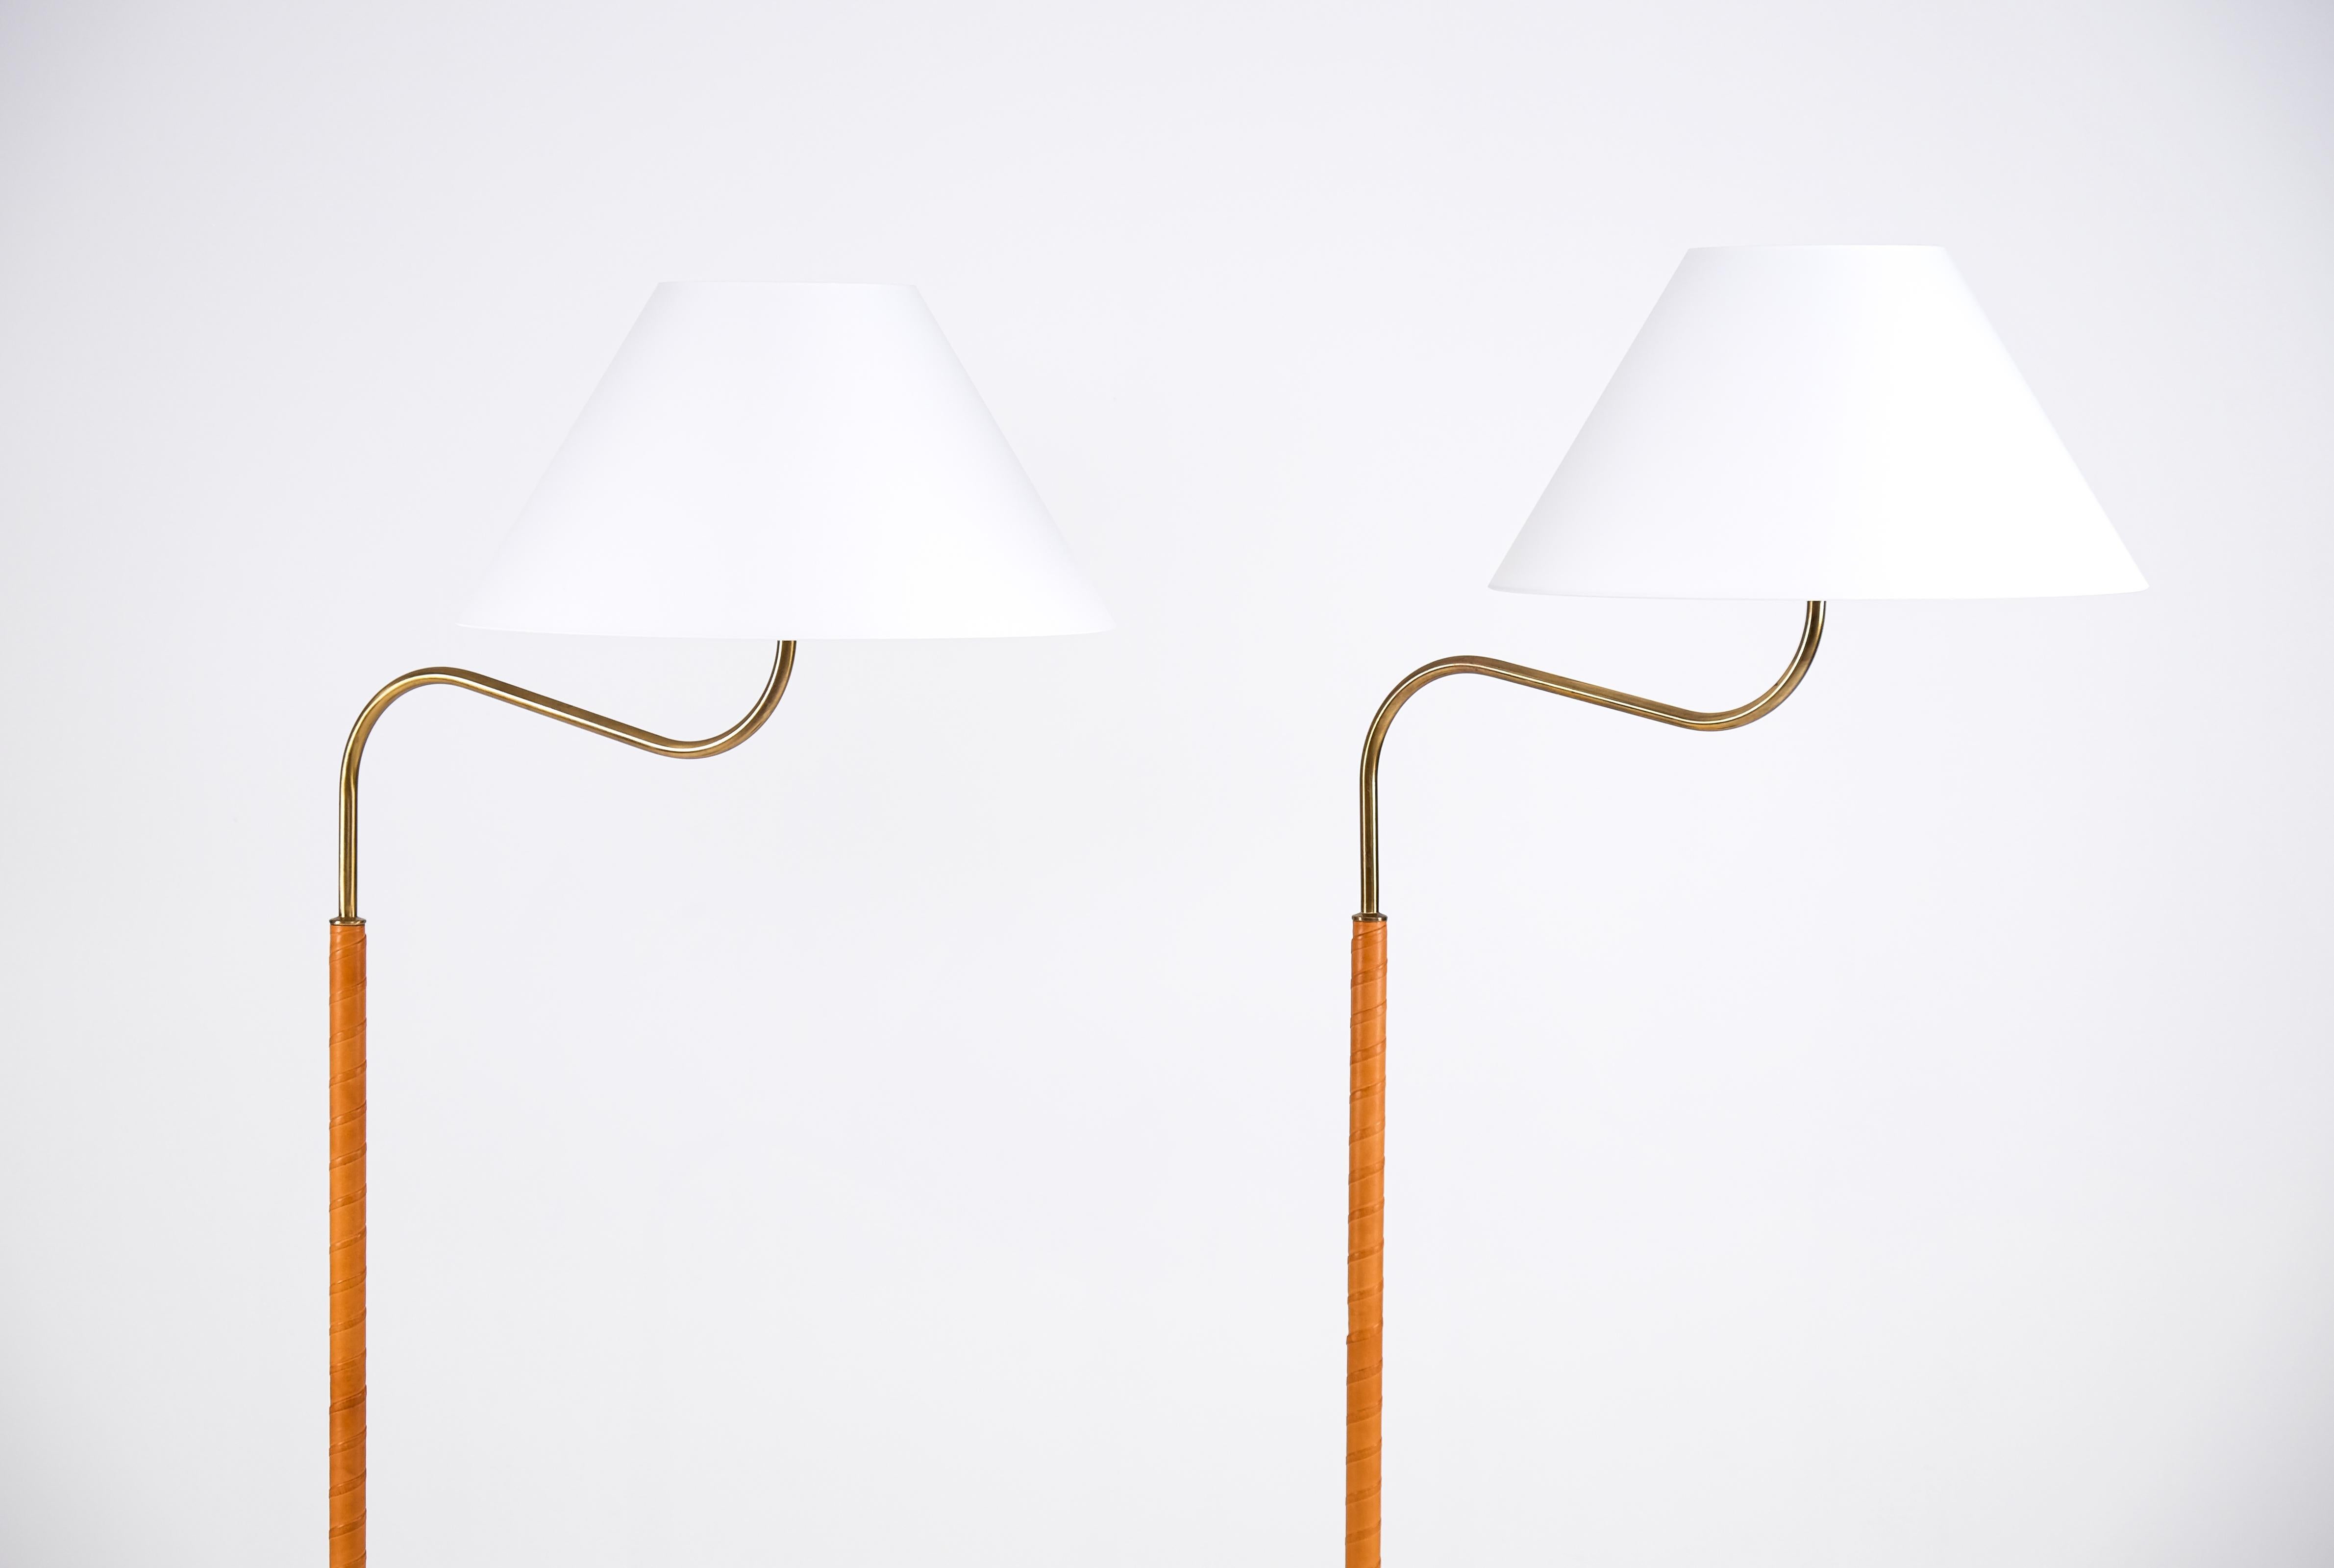 Pair of 'Large Camel' Floor Lamps by Josef Frank, Sweden, 1960s For Sale 2